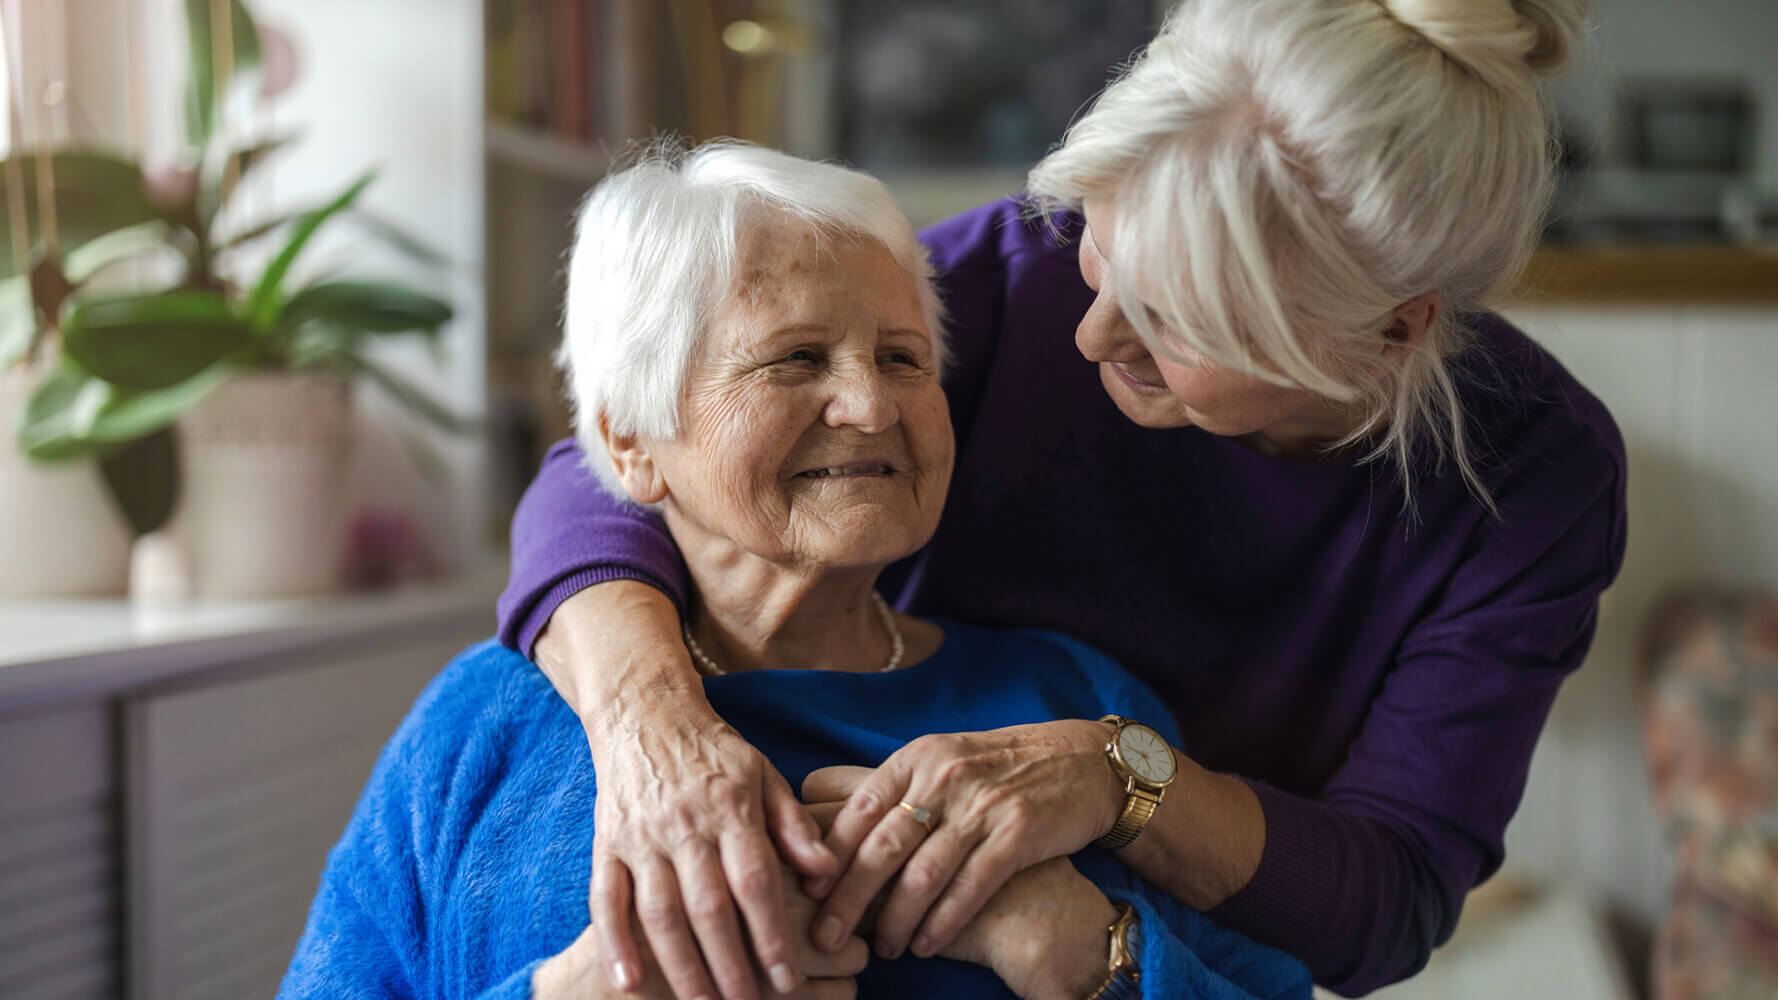 The silent generation represented by two ladies hugging.